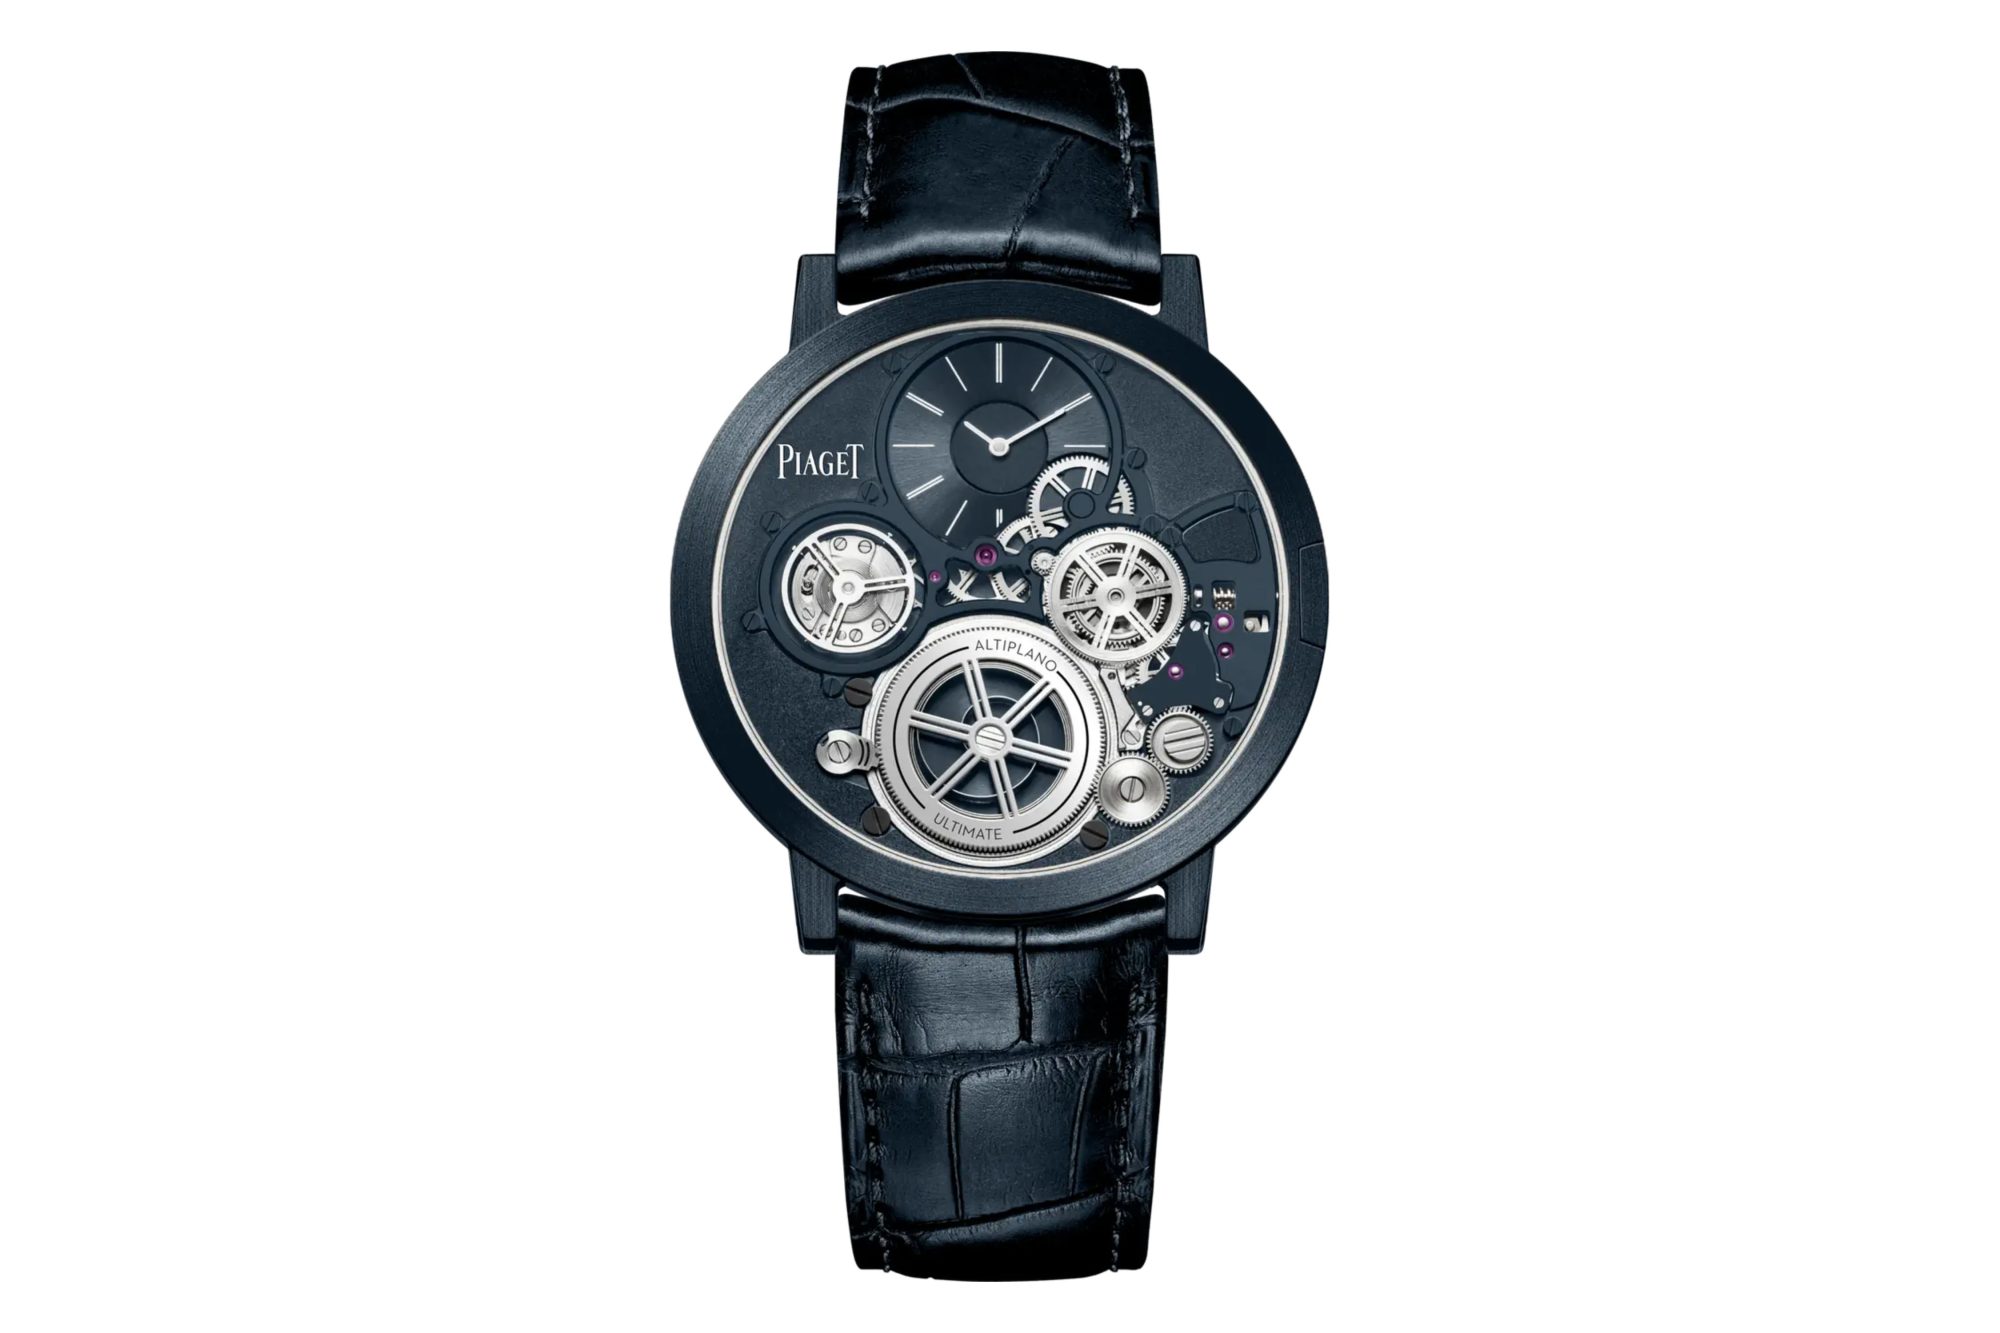 Piaget Altiplano Ultimate Concept Watch